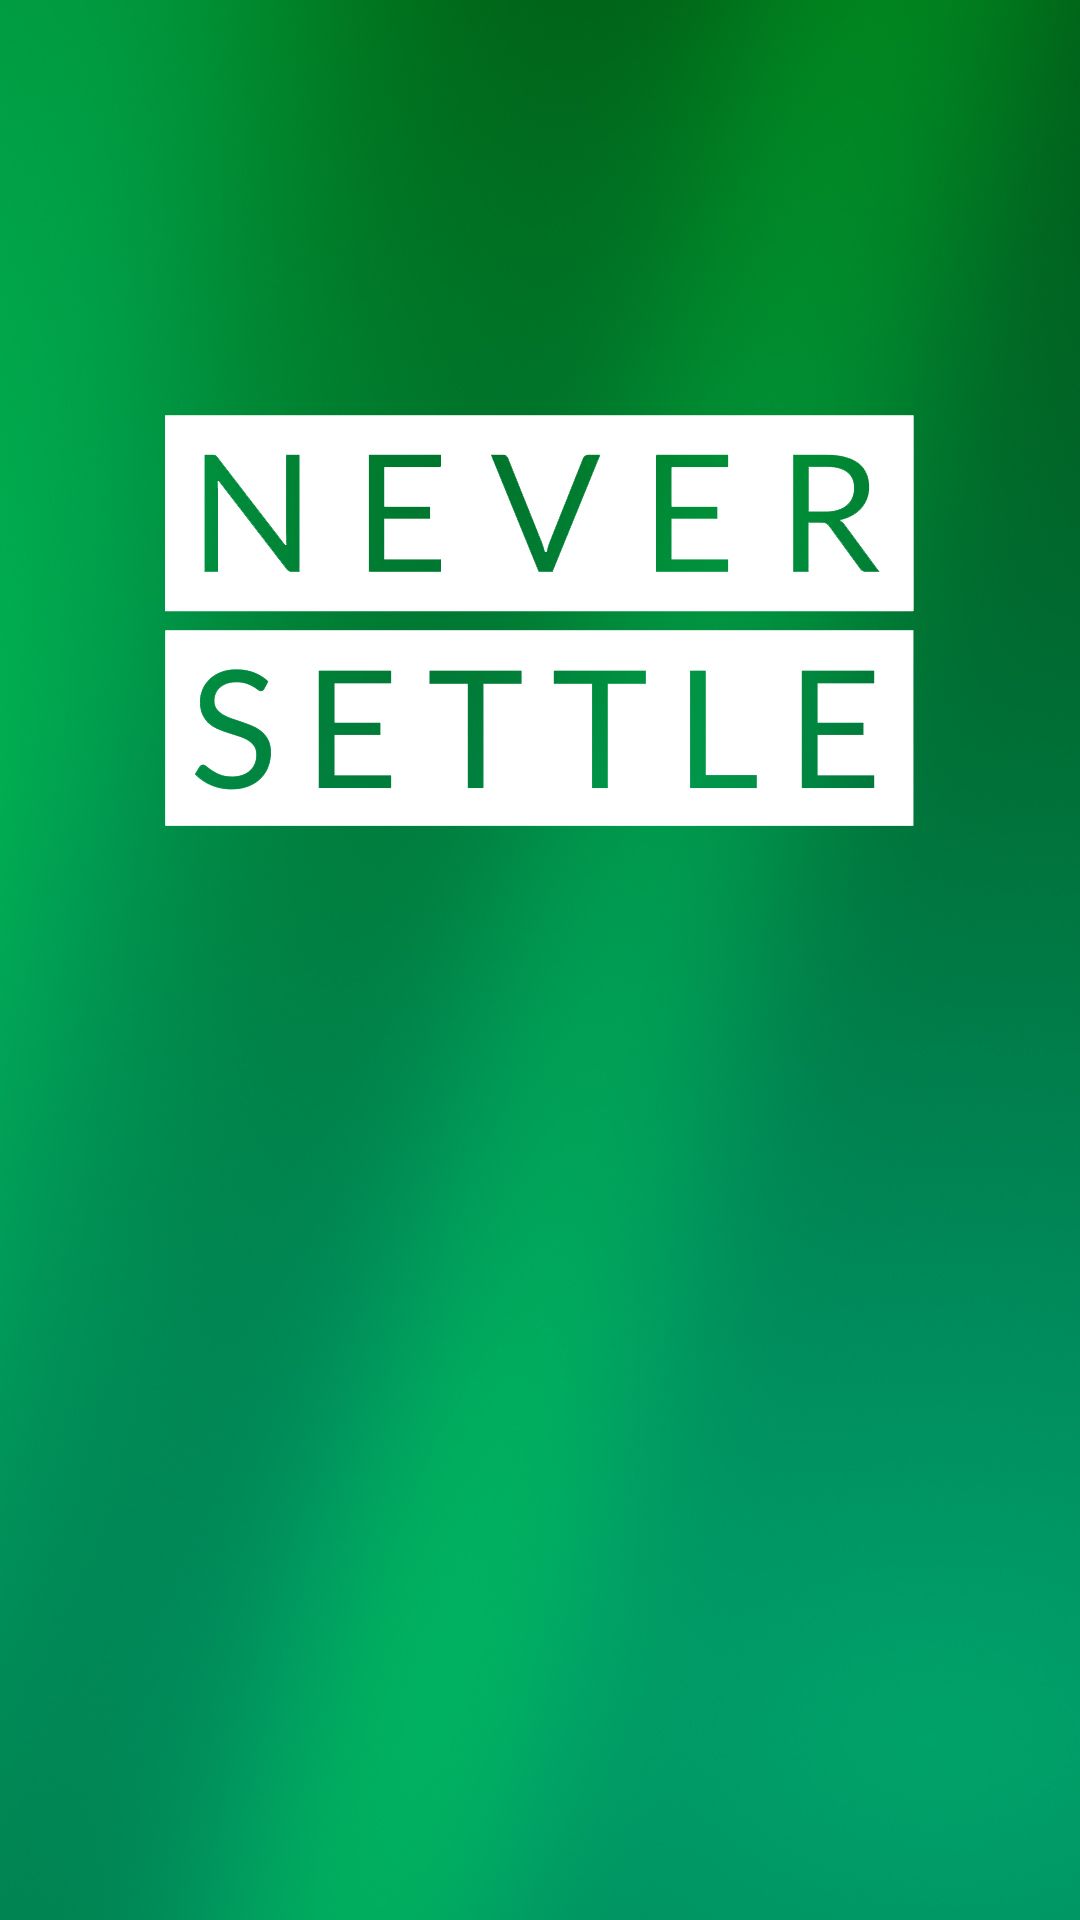 Oneplus 8 - 1 - Oneplus Never Settle Wallpaper For Android , HD Wallpaper & Backgrounds